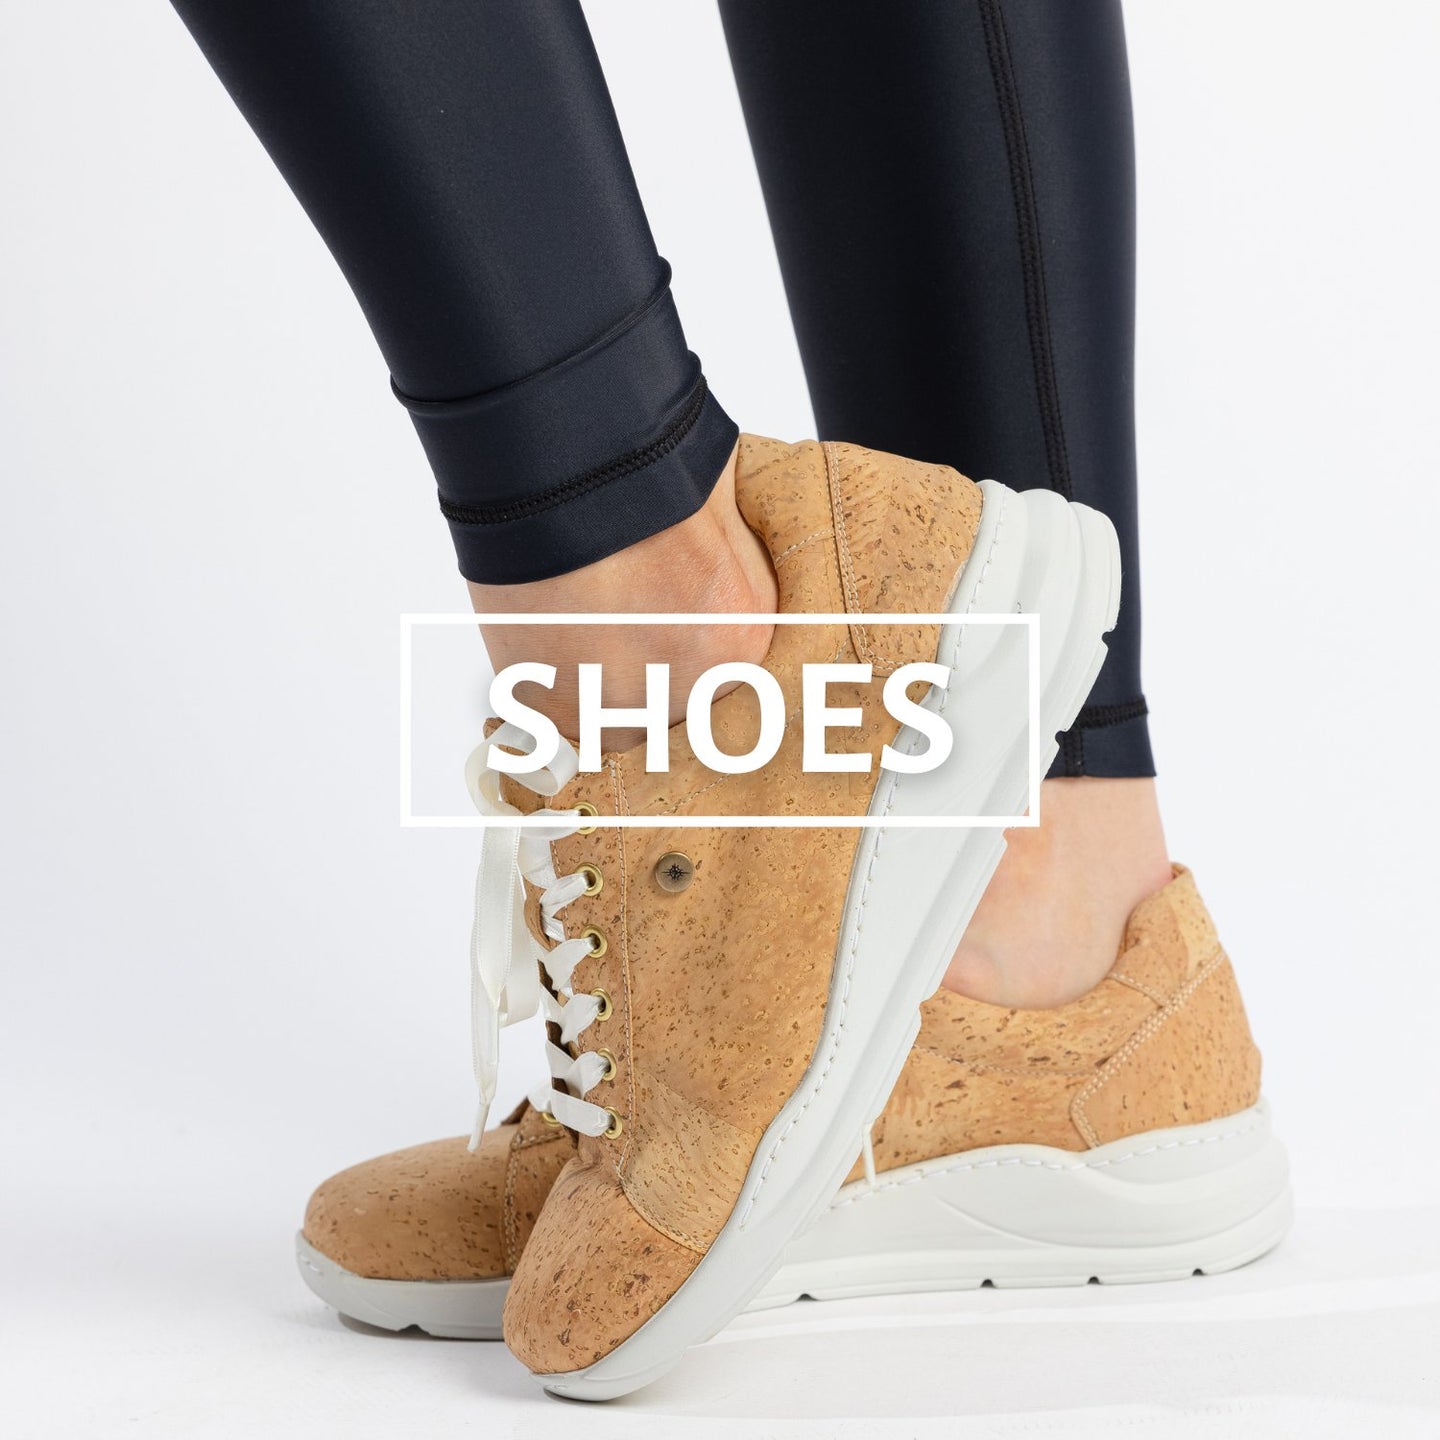 Luxury Eco-Friendly Women's Shoes | Sustainable Sneakers by Cari Capri